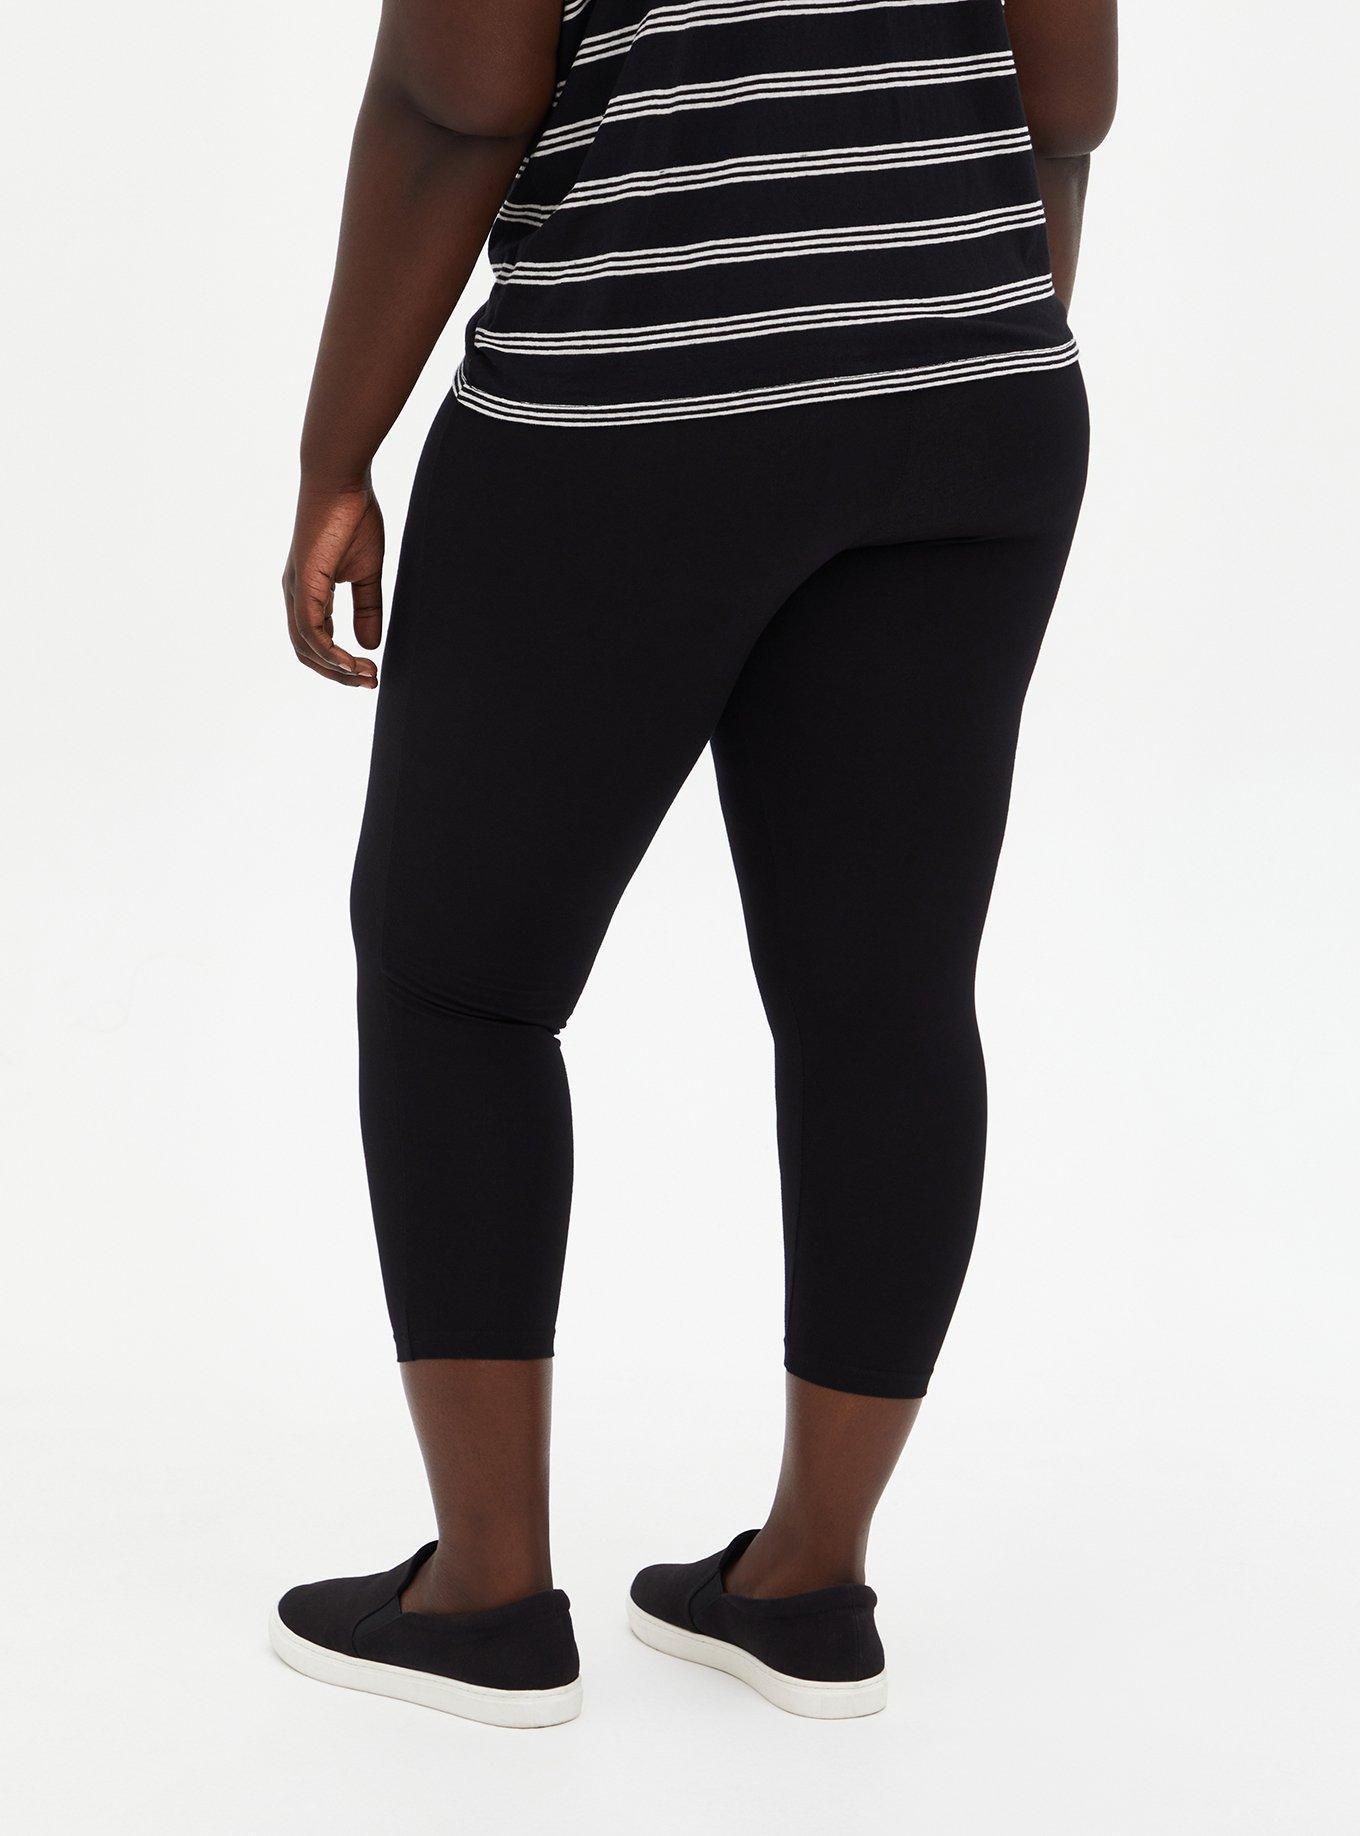 Torrid Active Black & White Abstract Ruched Back Cropped Leggings Size 1X -  $22 - From Amber